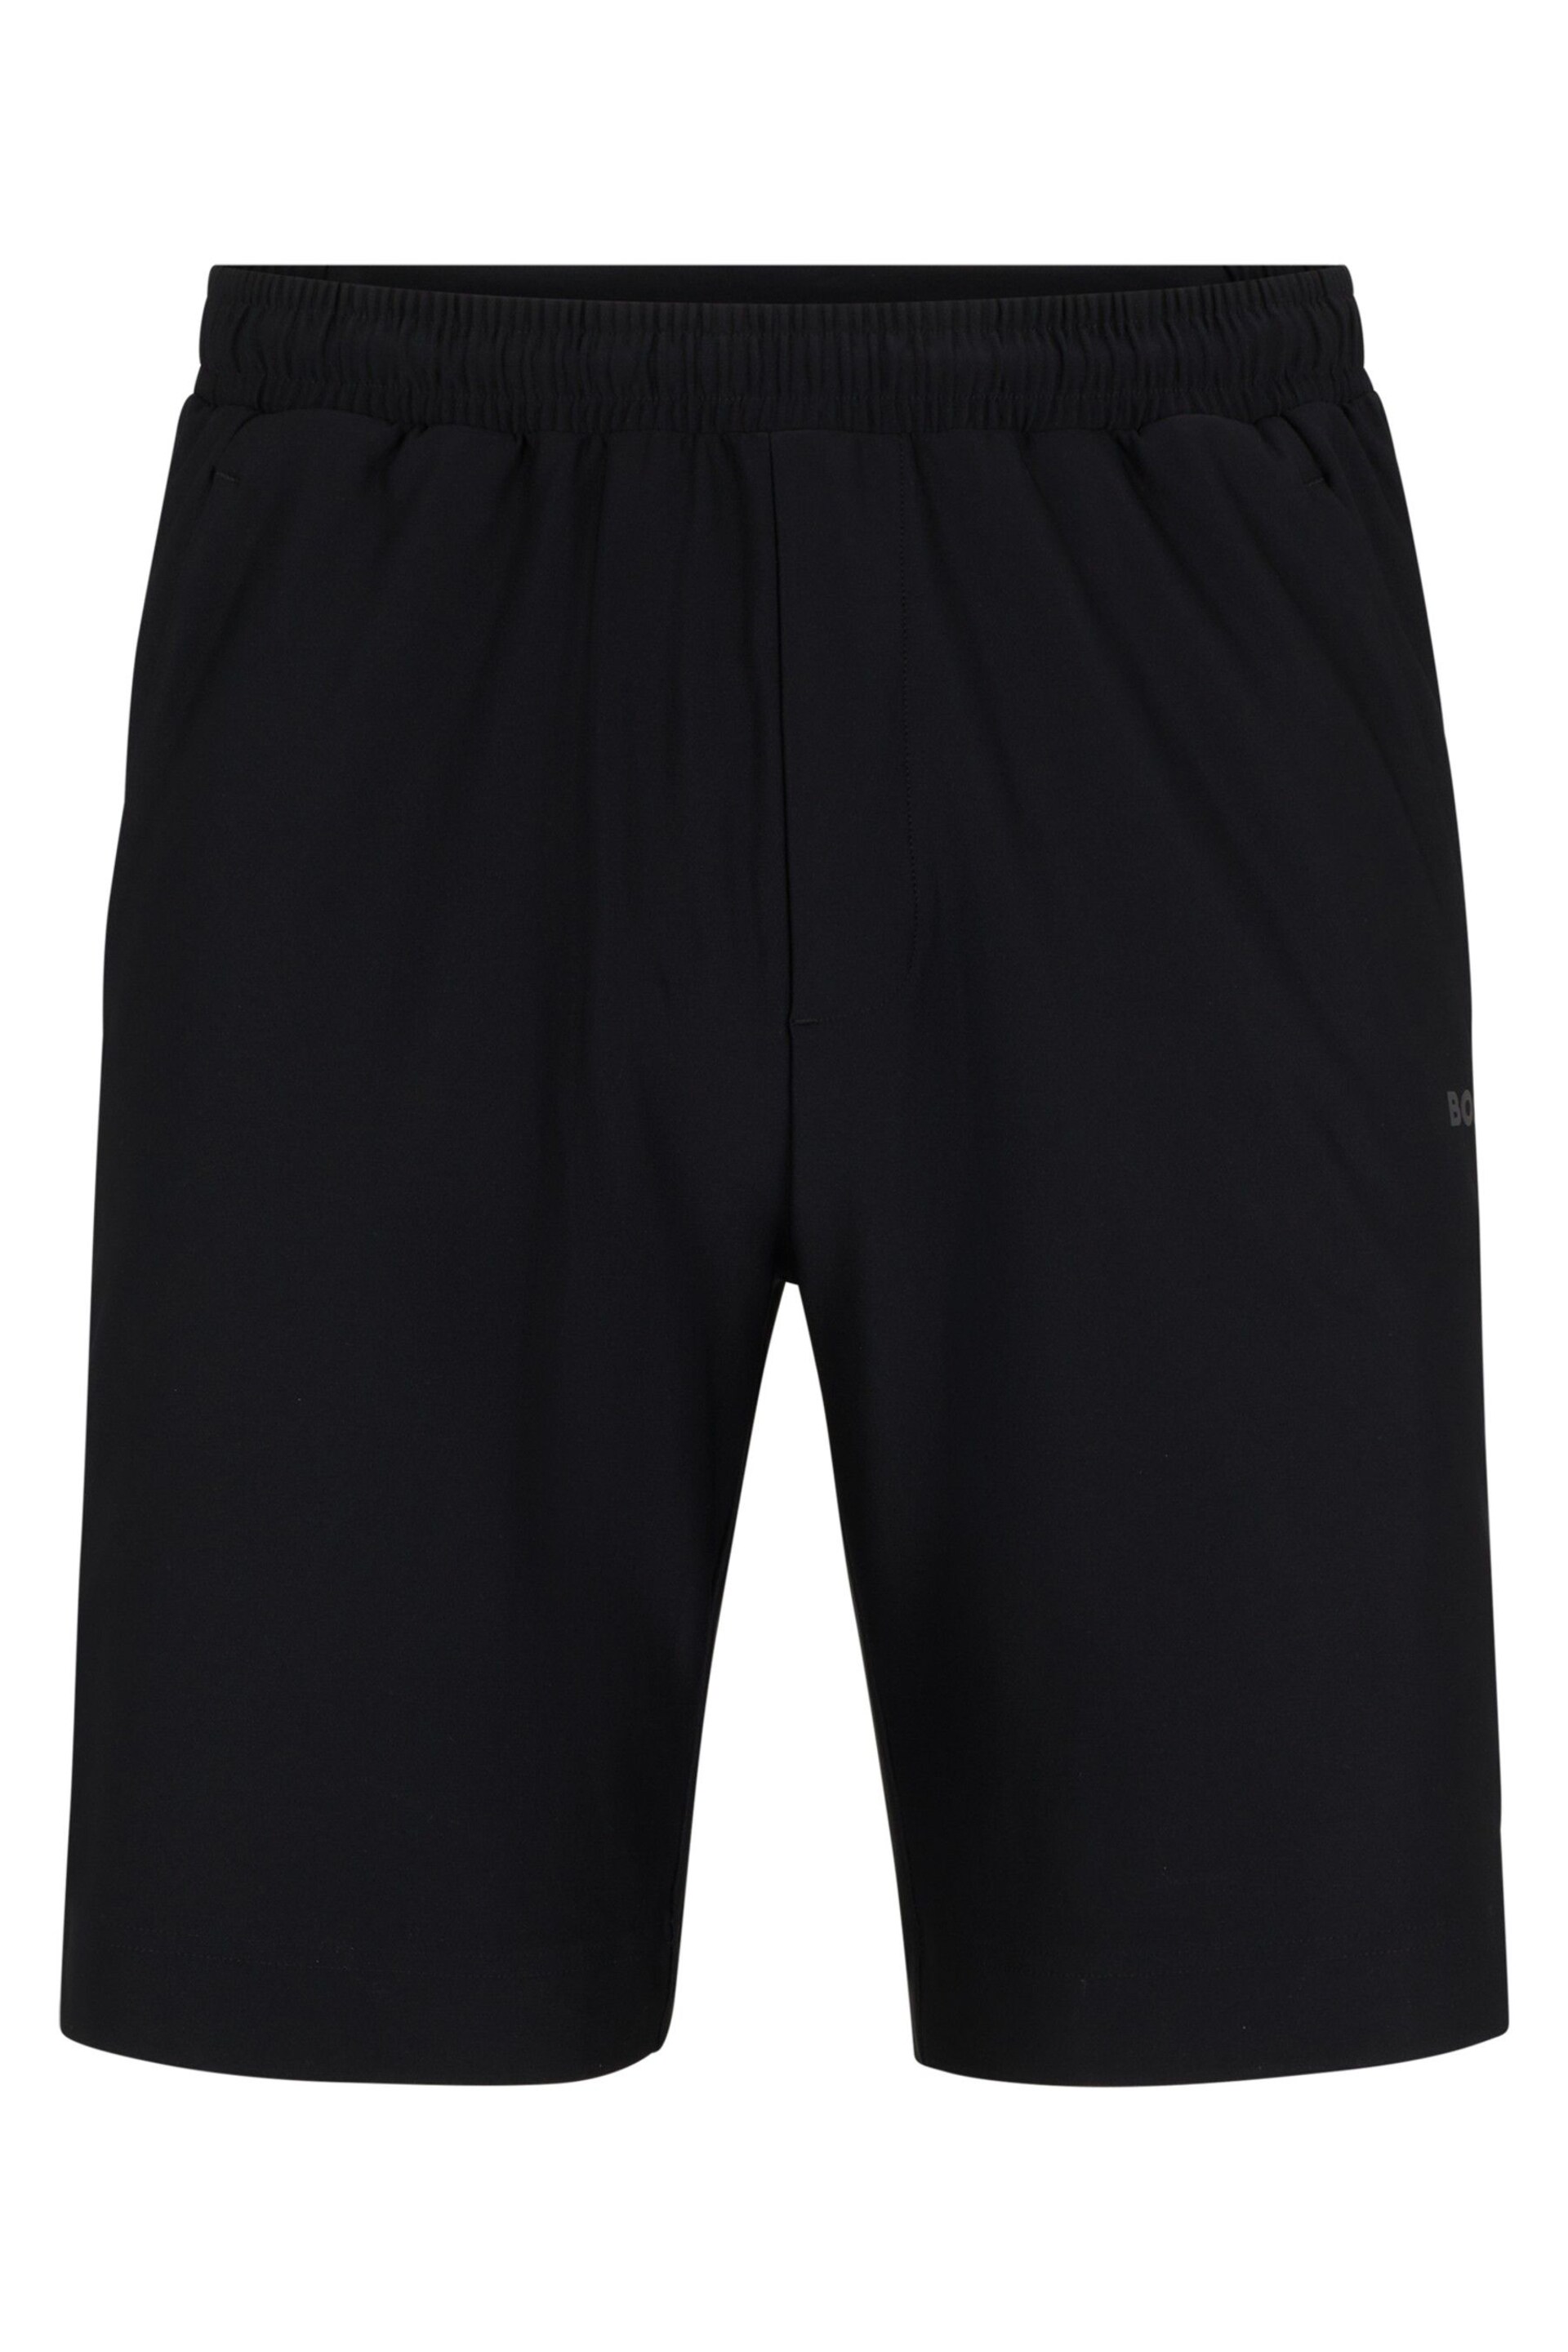 BOSS Black Quick-Dry Shorts With Decorative Reflective Logo - Image 1 of 2